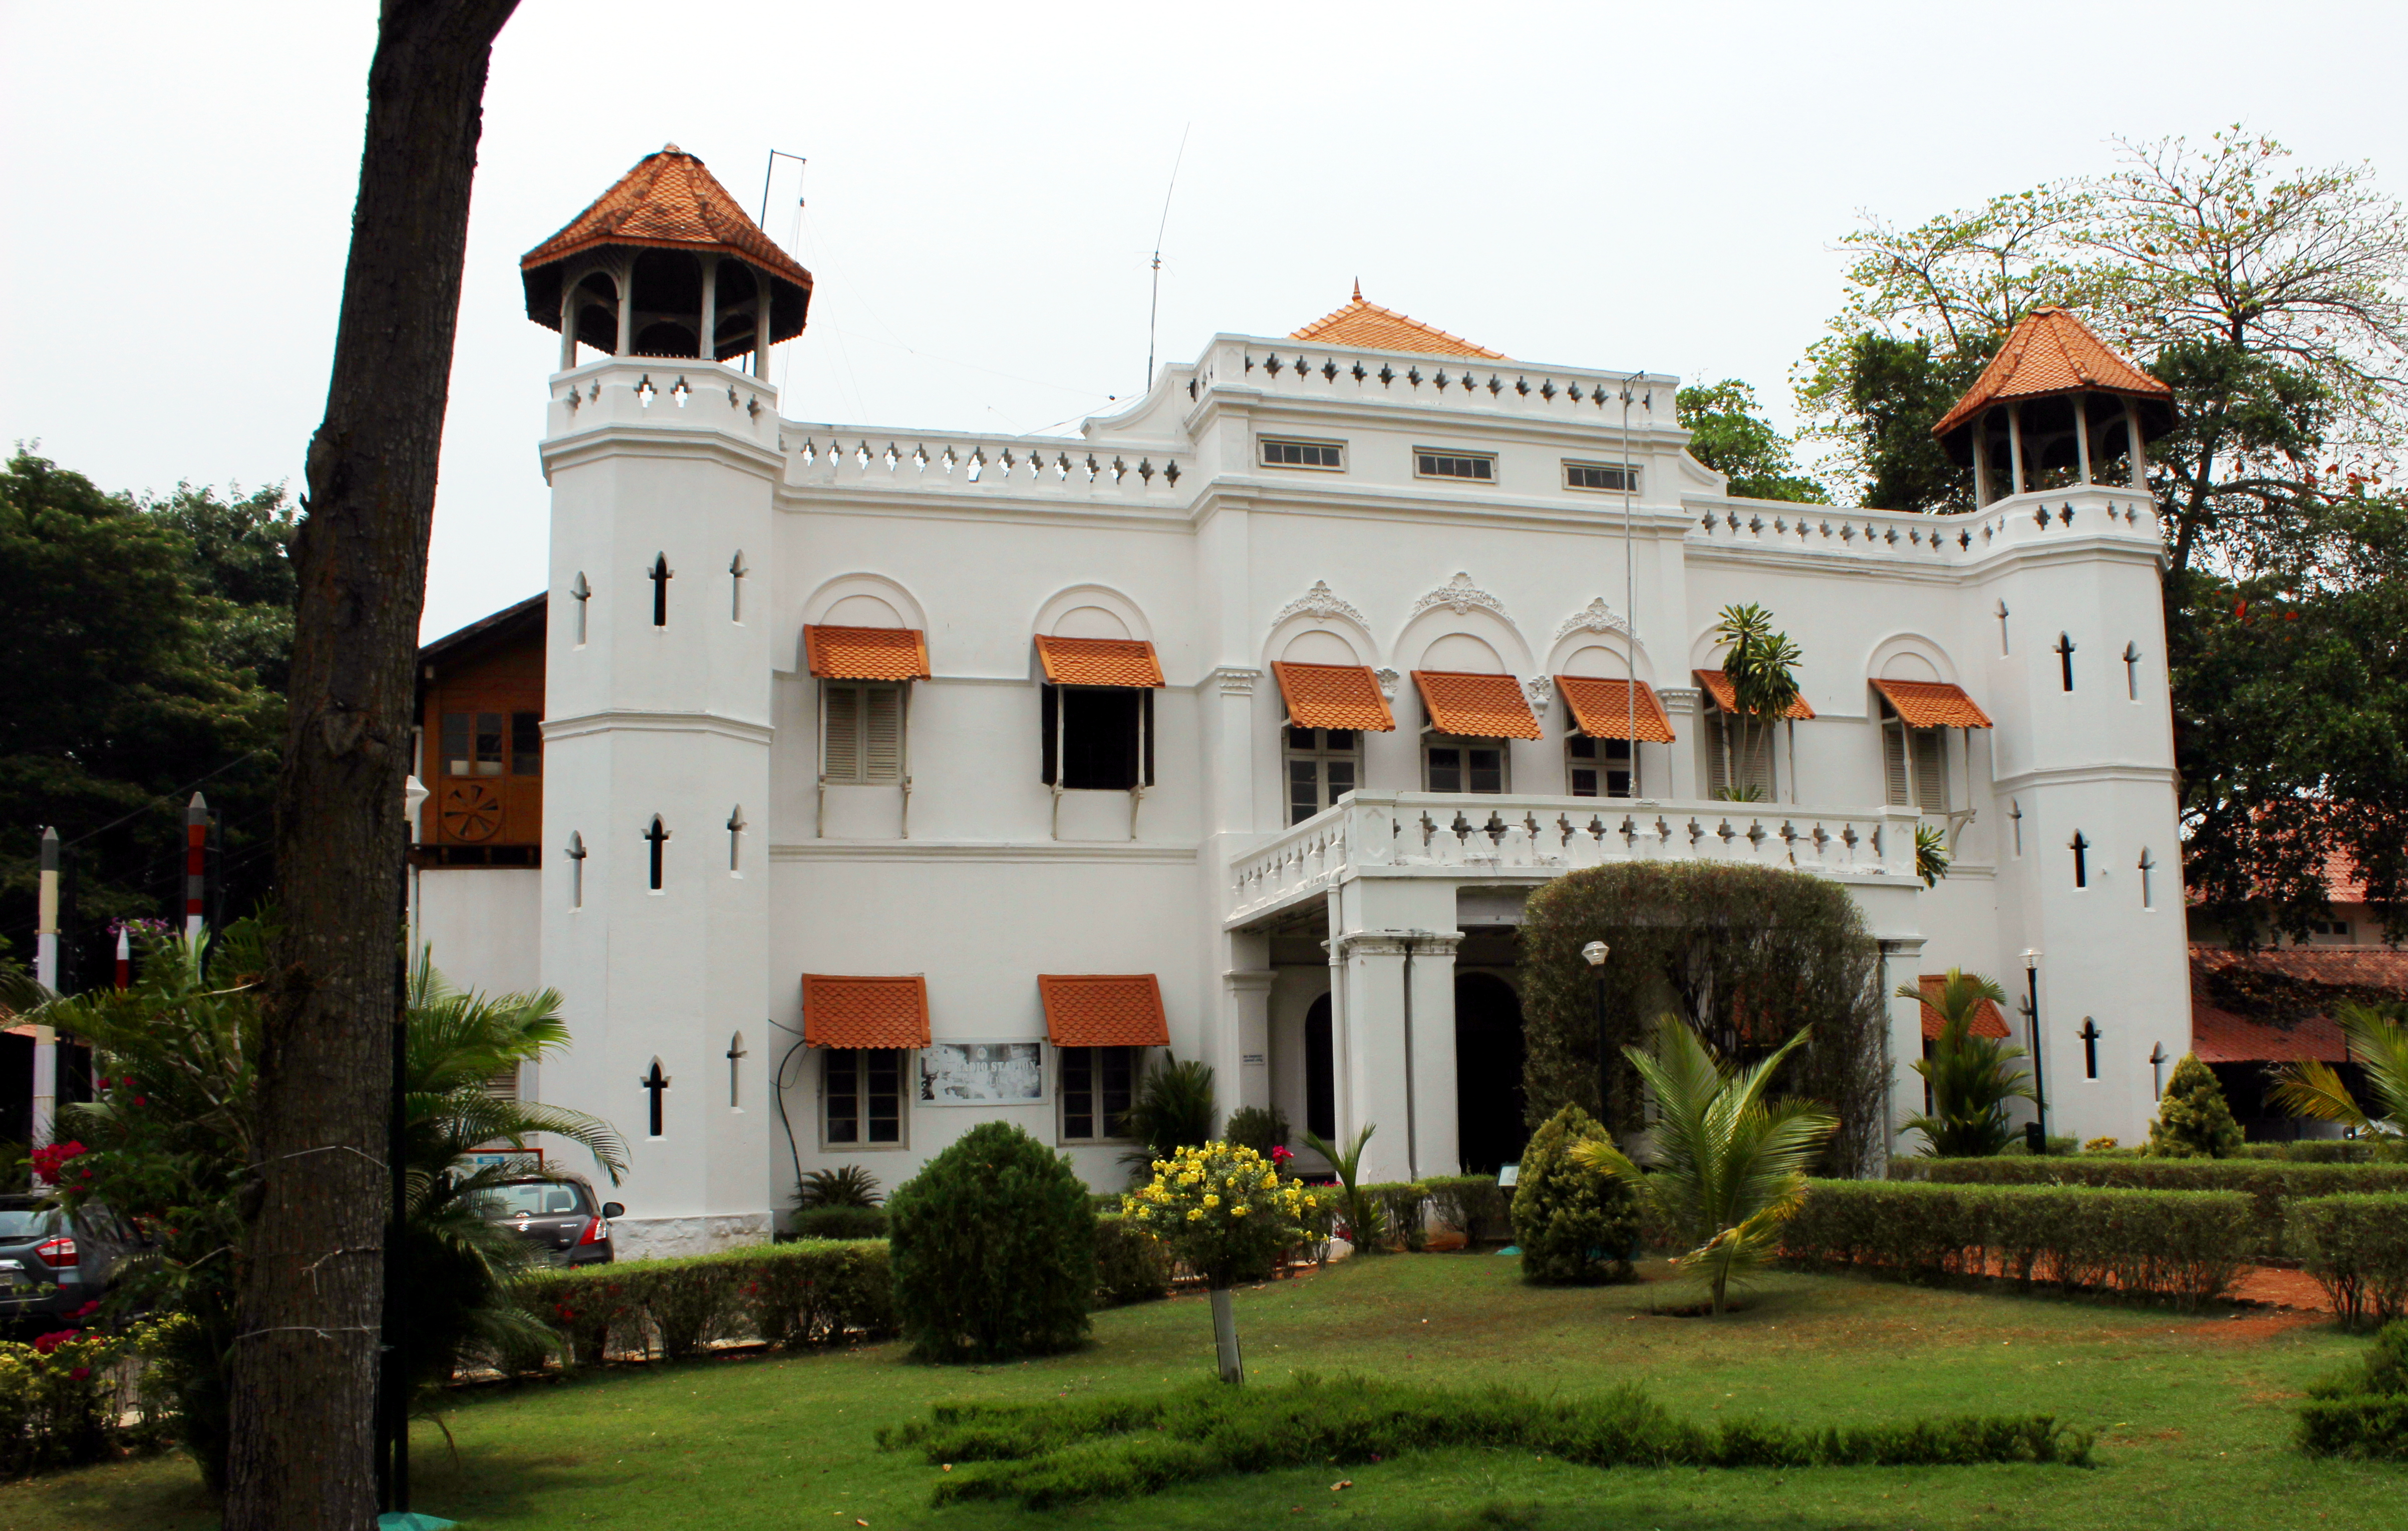 Kerala Science and Technology Museum institution dedicated to promoting scientific knowledge